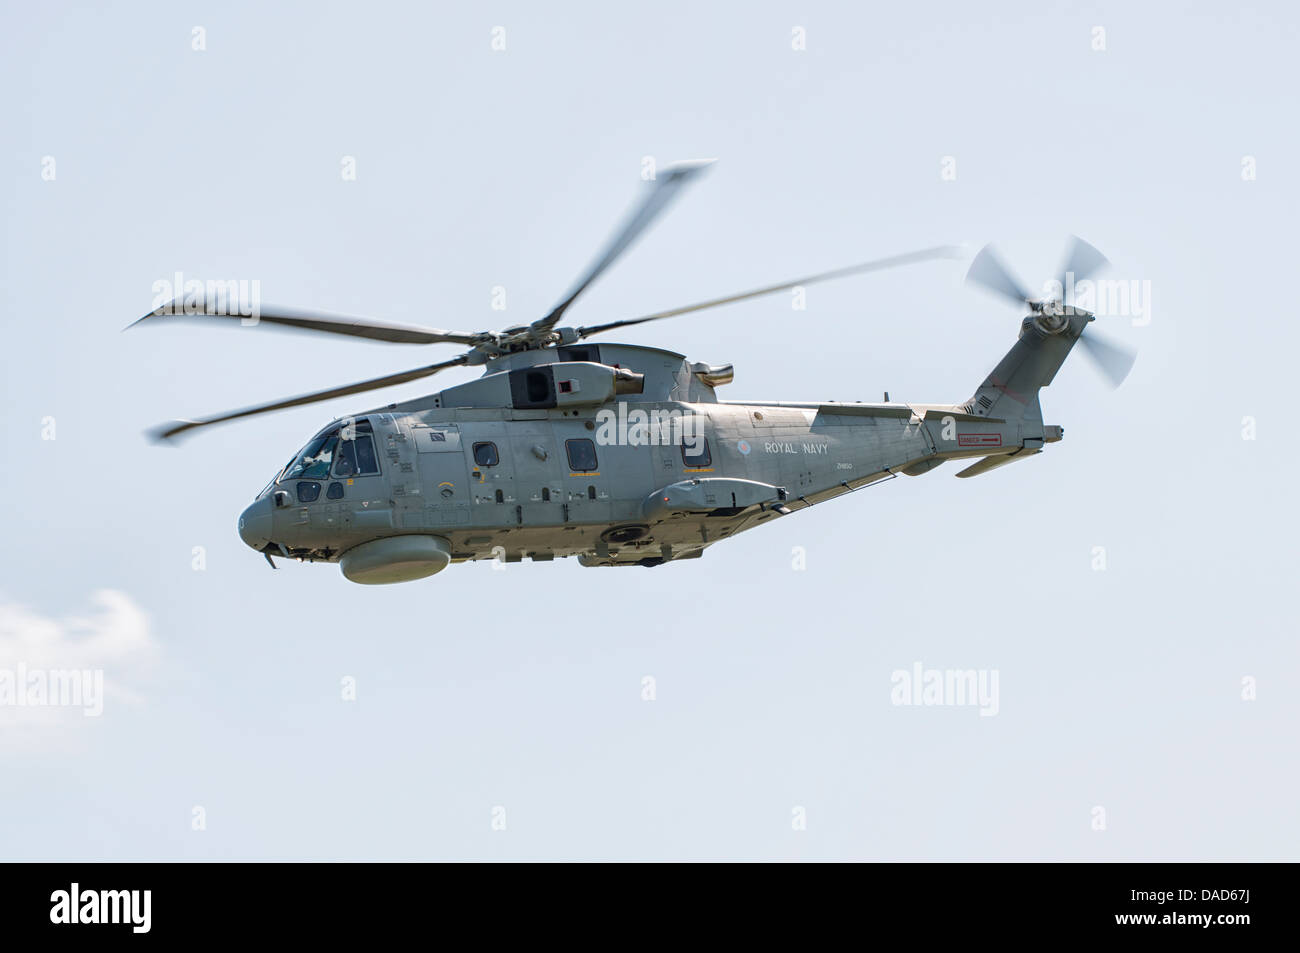 Royal Navy Helicopter an Augusta Westland Merlin EH-101 displays at the 2013 RAF Waddington Air Show Stock Photo